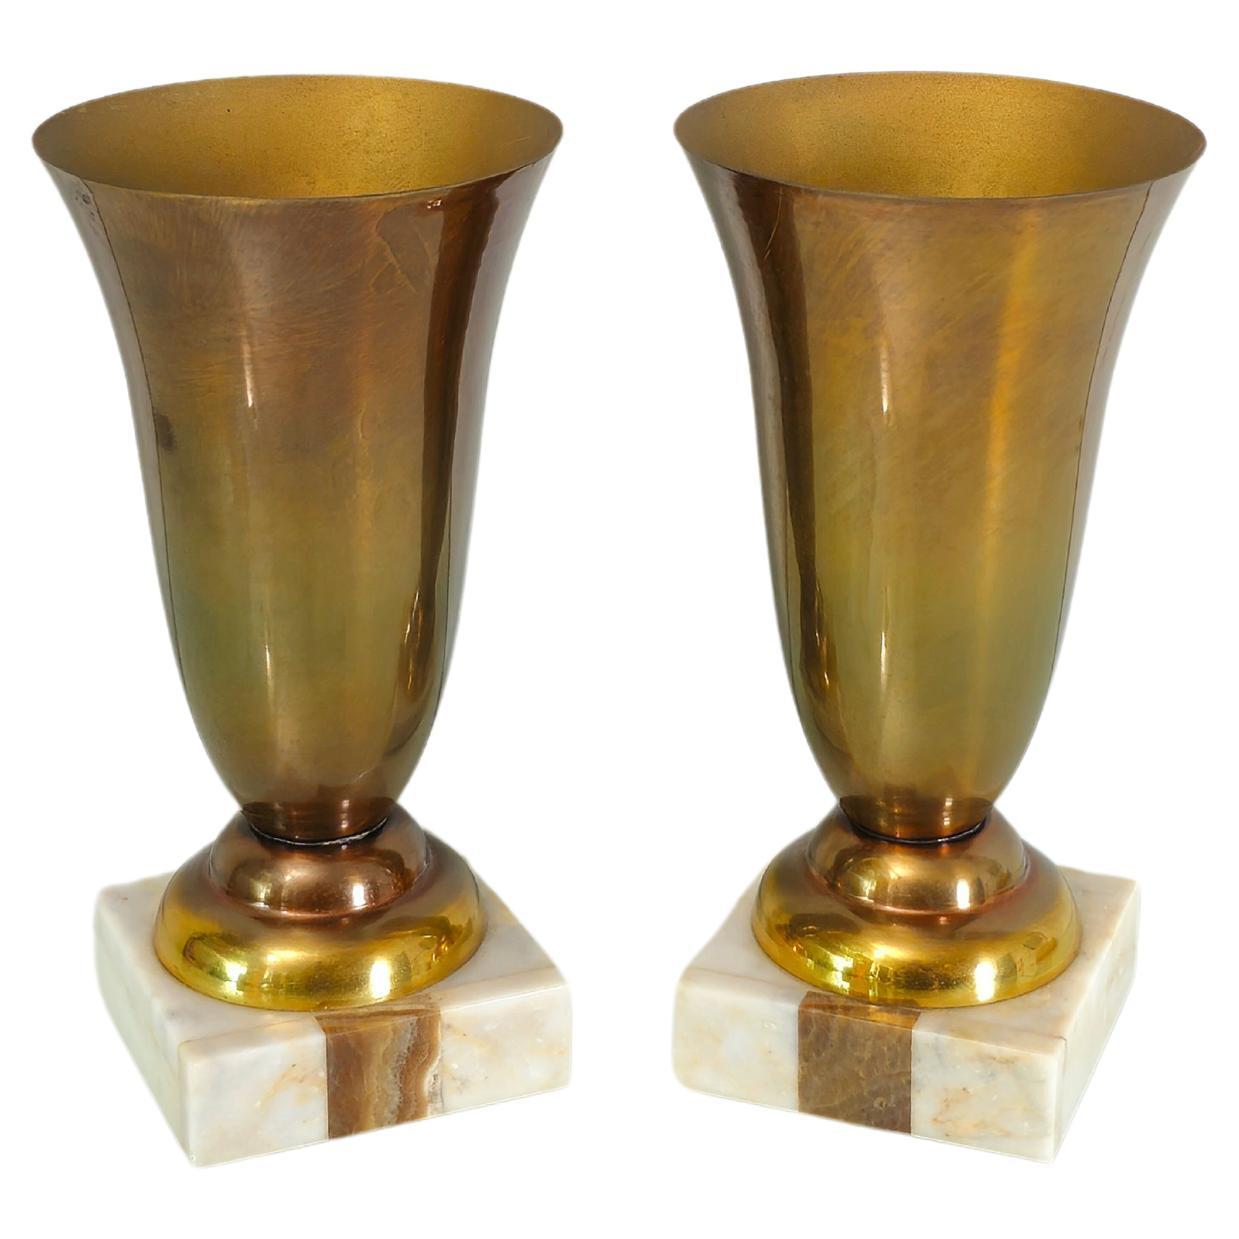 Decorative Objects Vases Aluminum Marble Midcentury Modern Italy 1960s Set of 2 For Sale